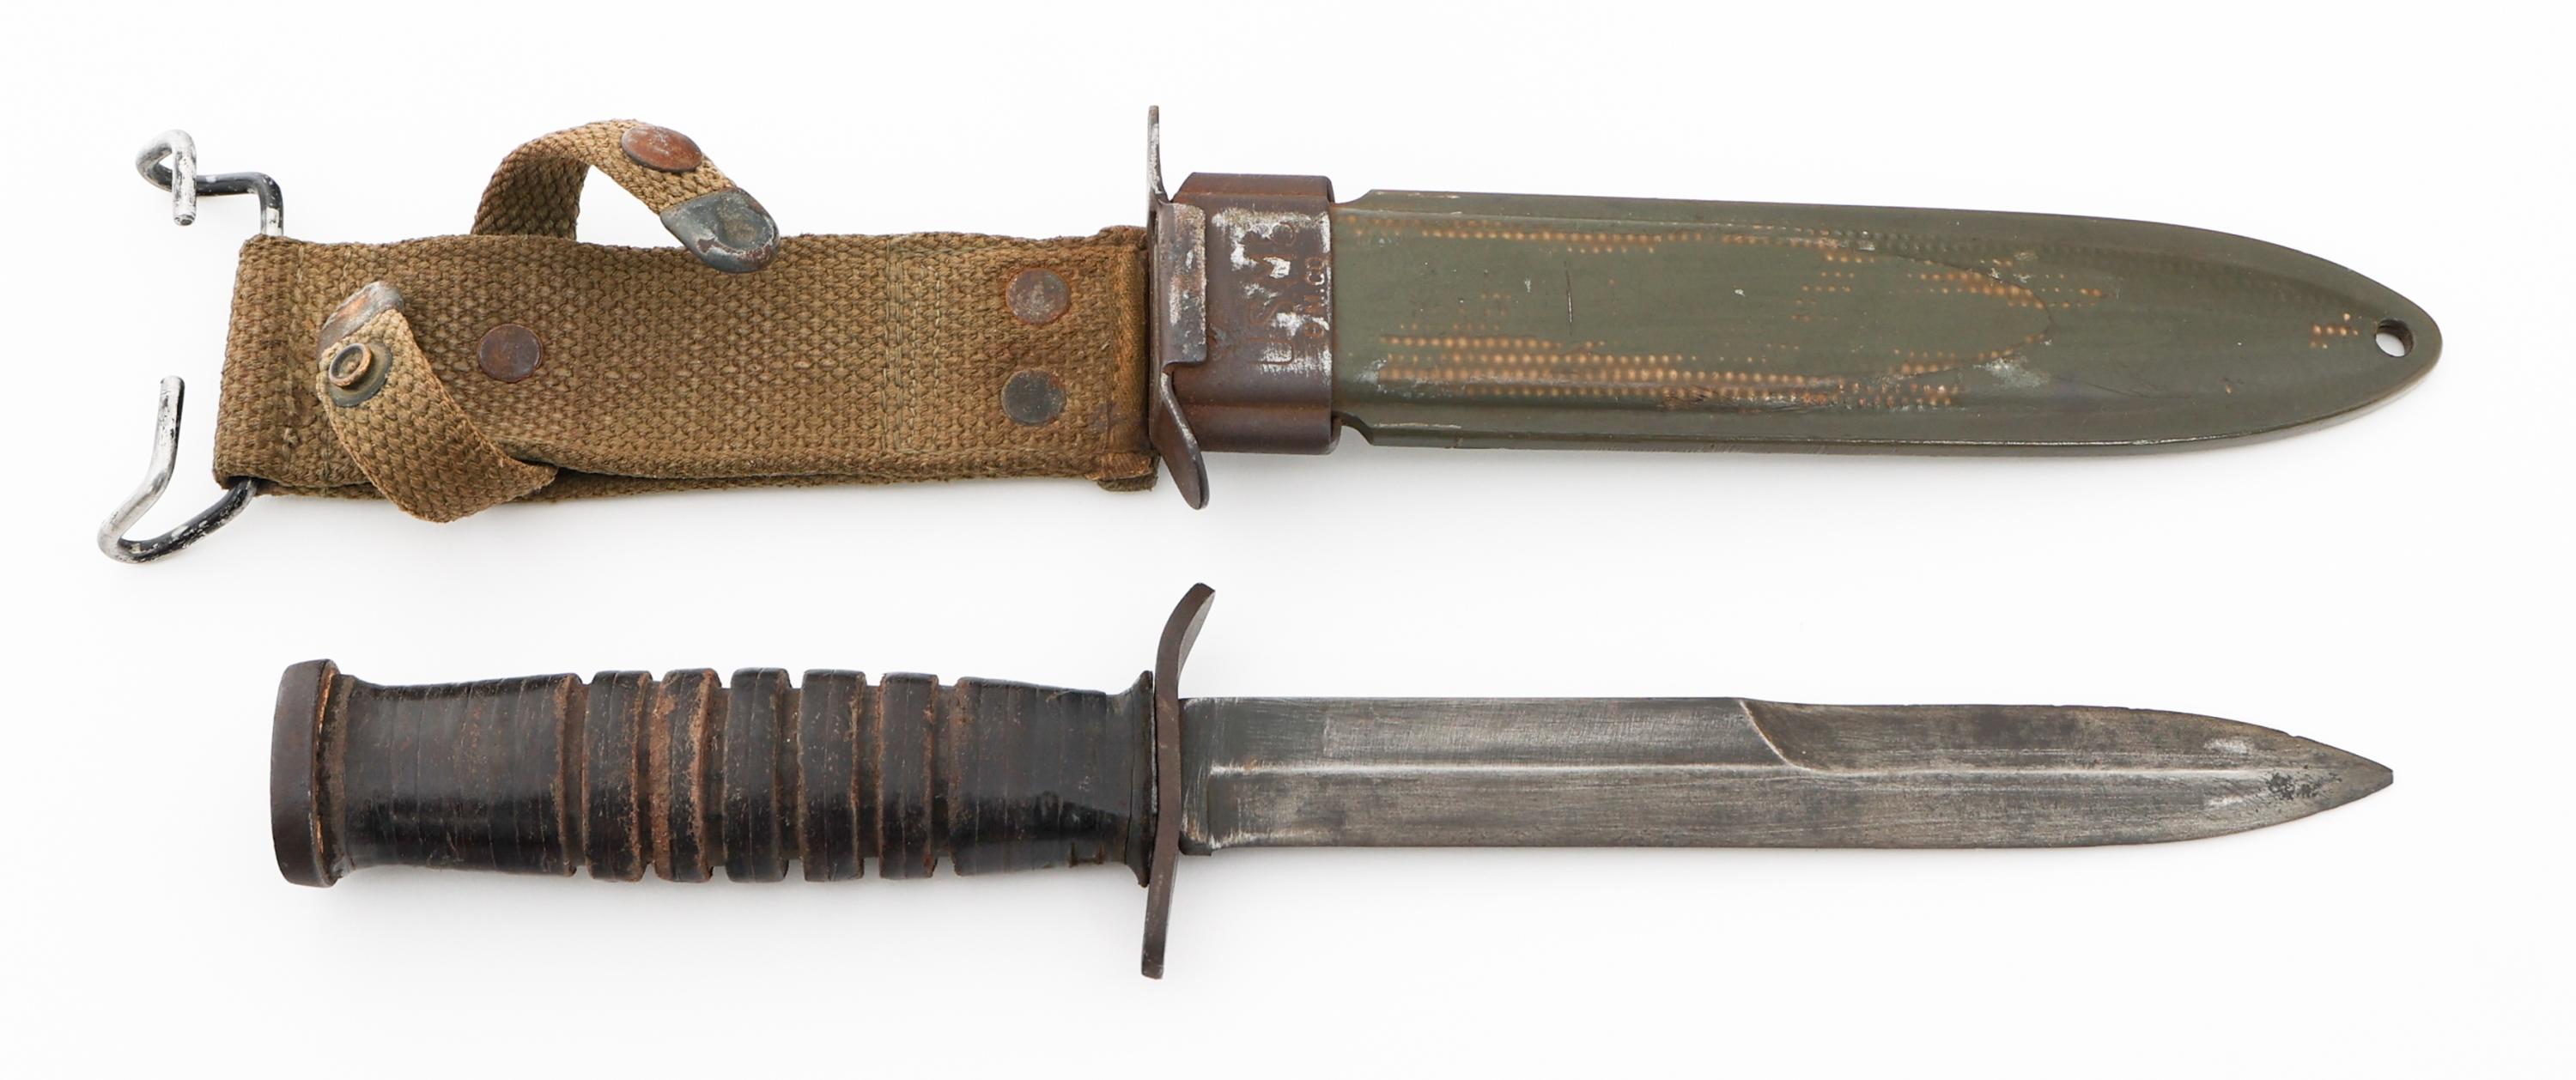 WWII US ARMY M3 FIGHTING KNIFE by CASE